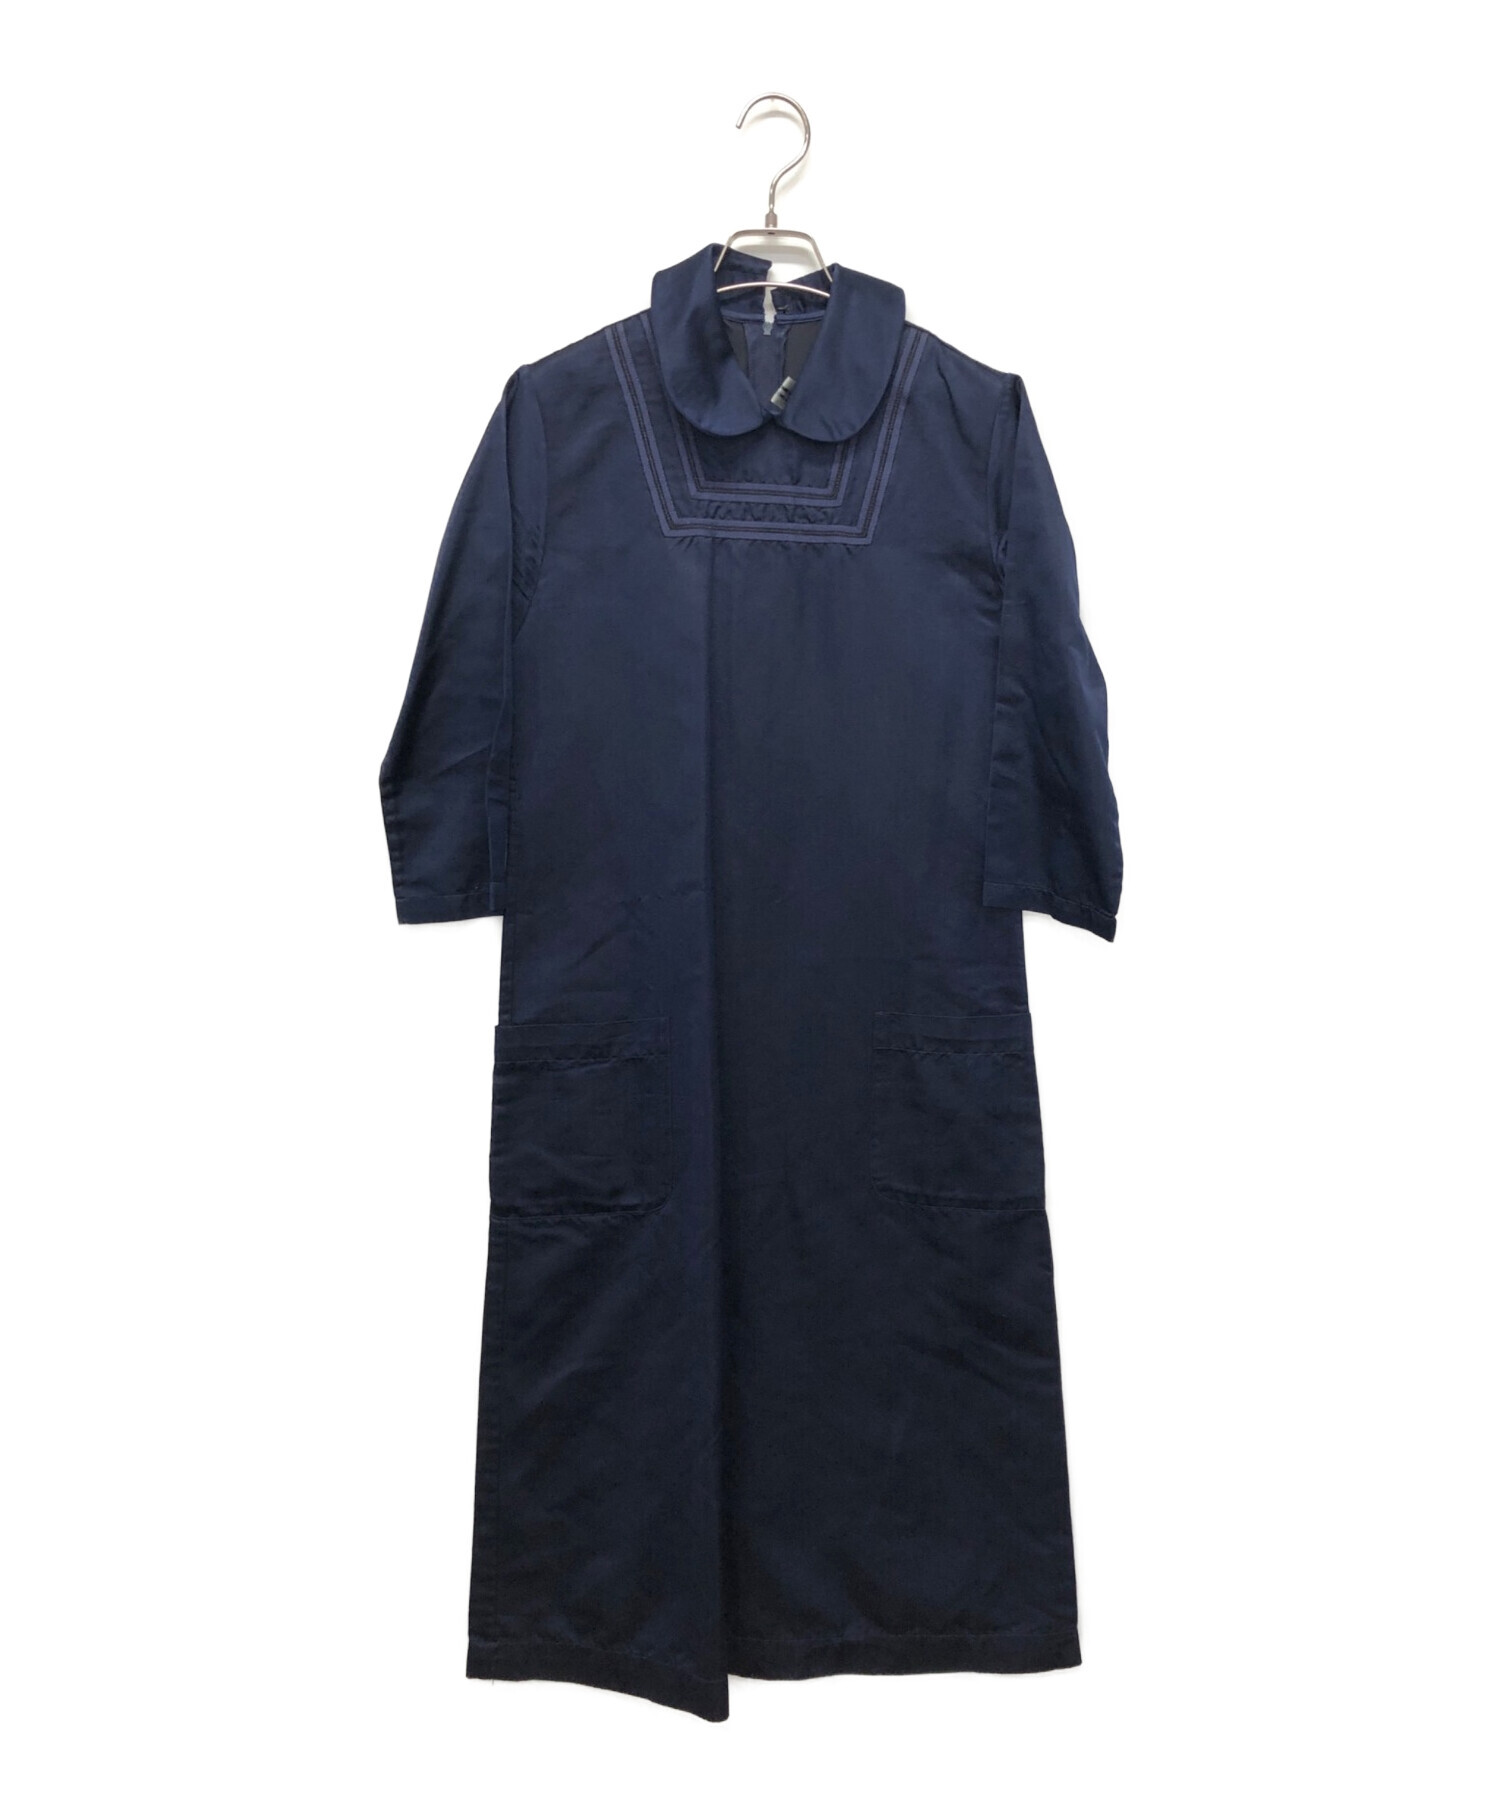 Jupe by Jackie (ジュップバイジャッキー) COMME des GARCONS (コムデギャルソン) シルクワンピース サイズ:S